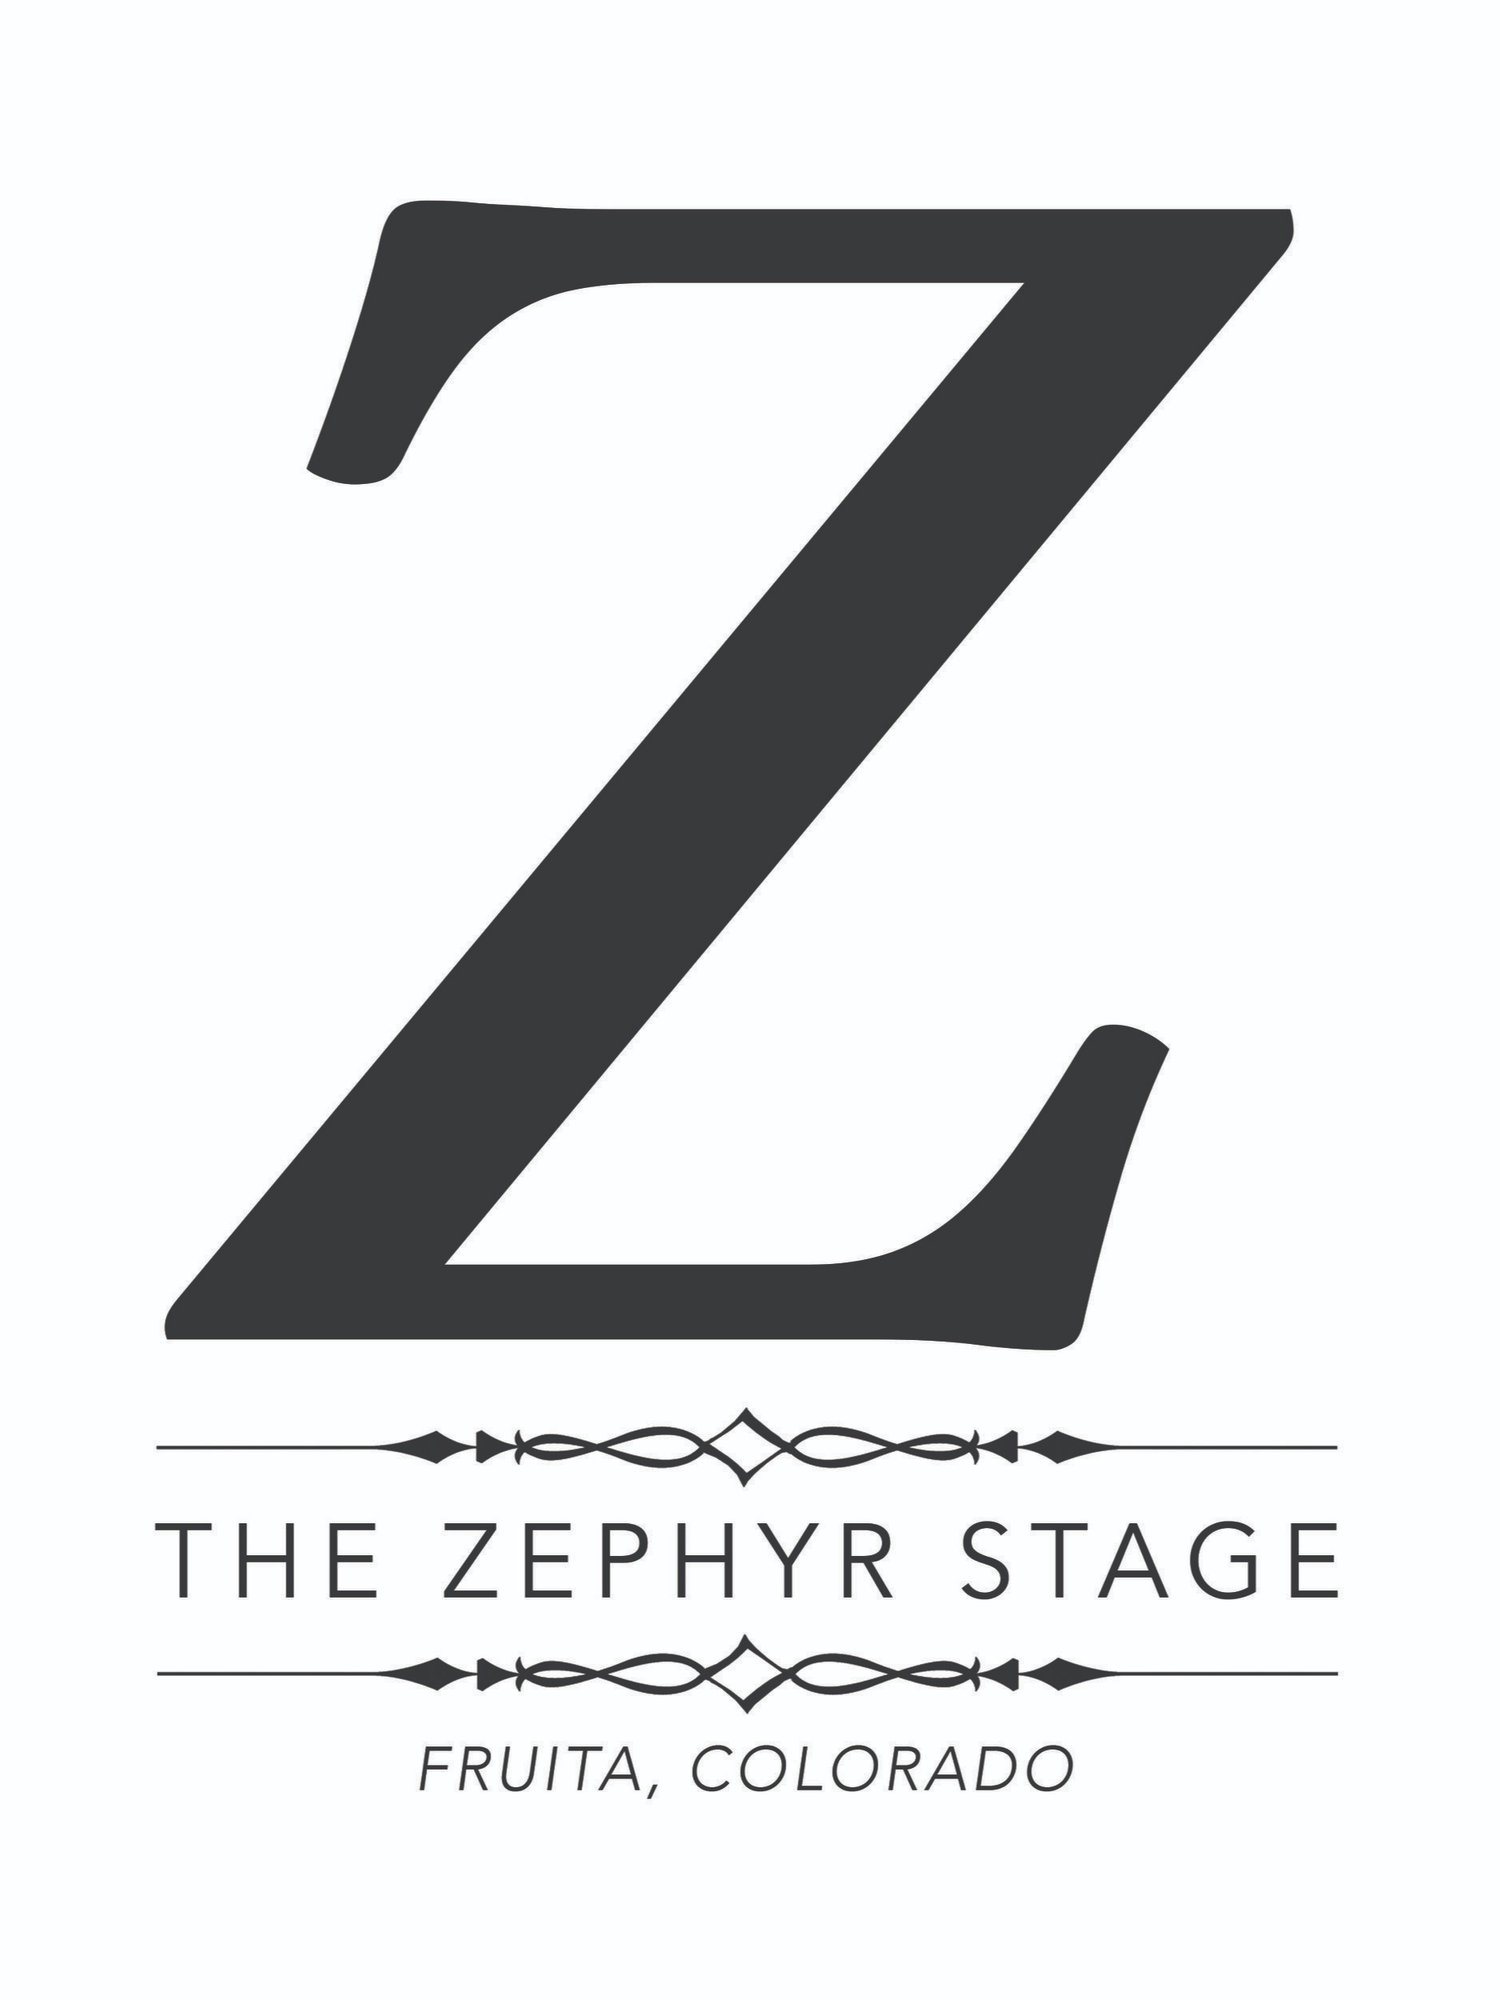 Zephyr Stage